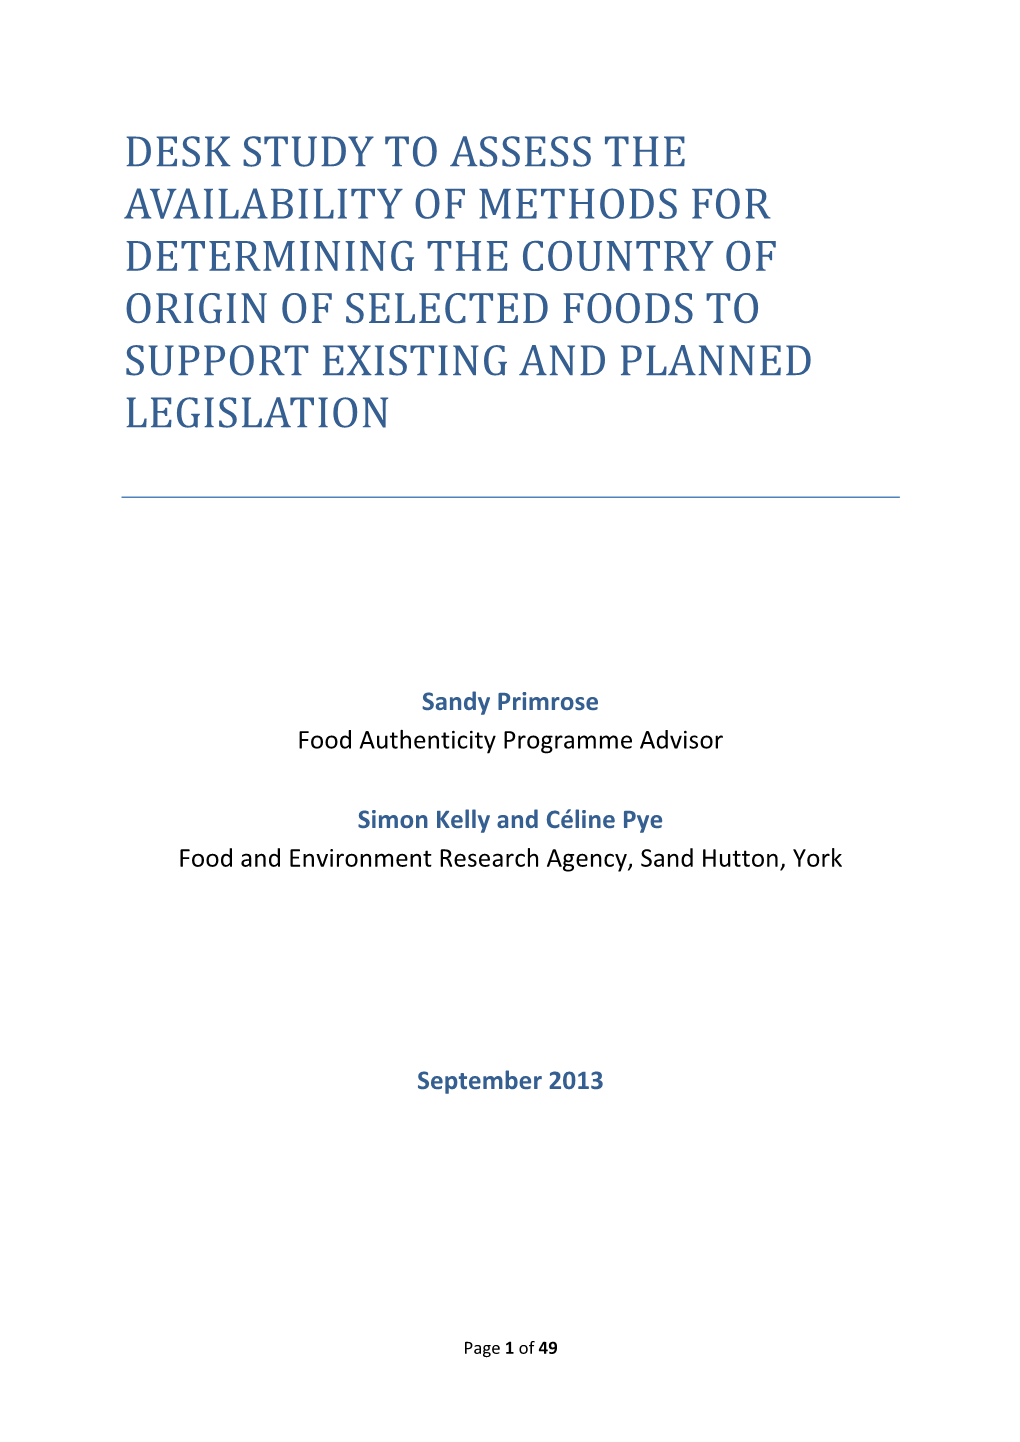 Desk Study to Assess the Availability of Methods for Determining the Country of Origin of Selected Foods to Support Existing and Planned Legislation